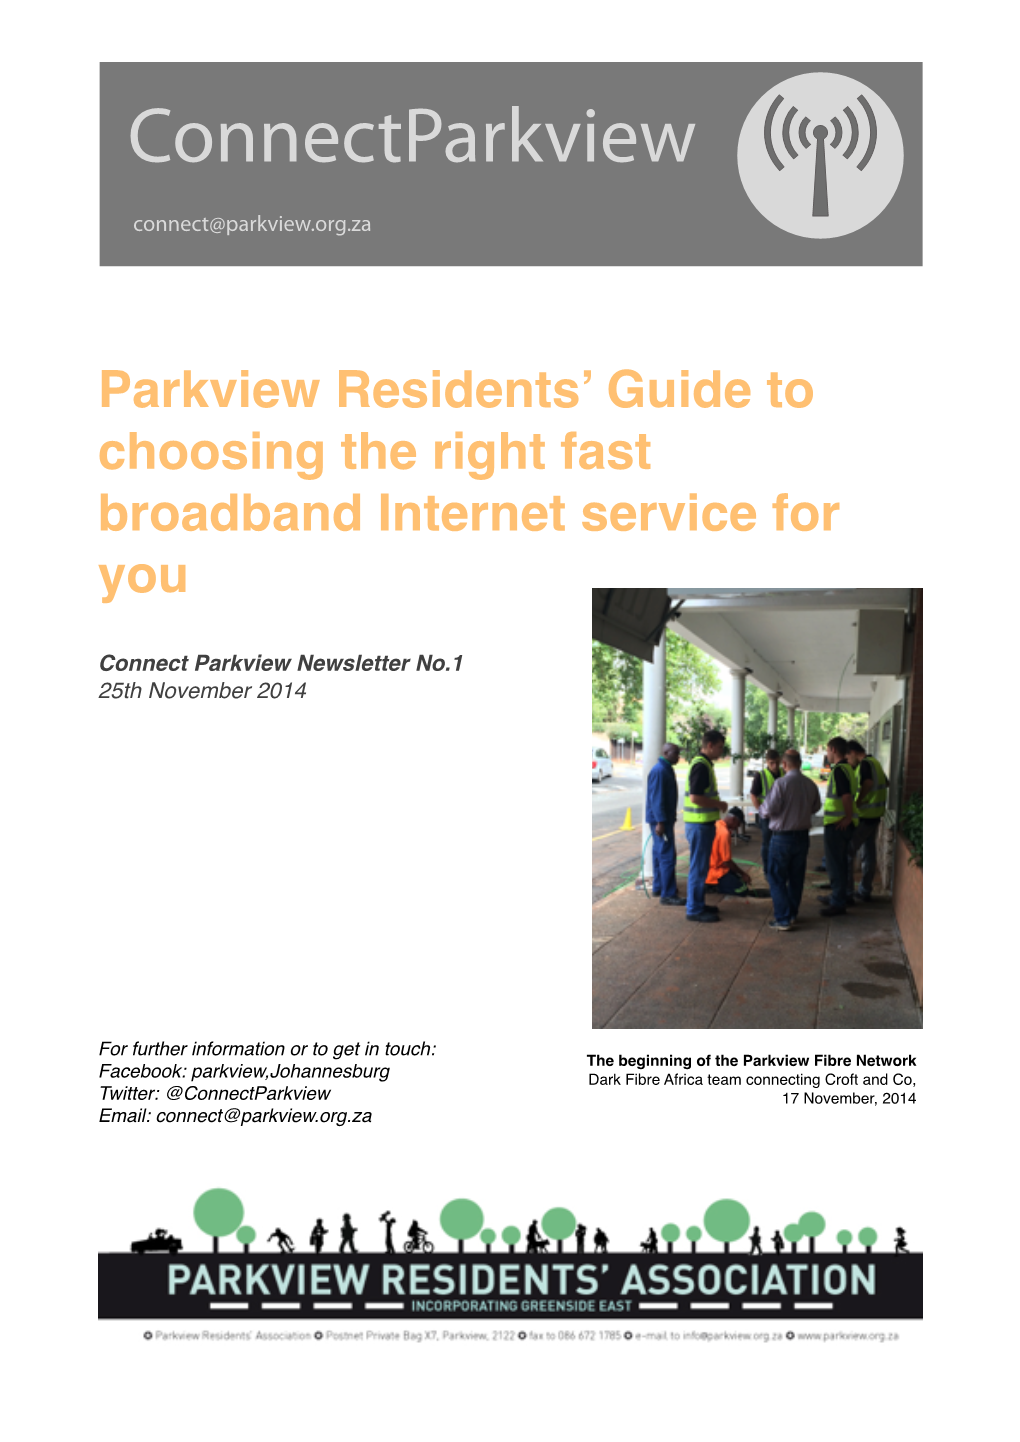 Parkview Residents' Guide to Choosing the Right Fast Broadband